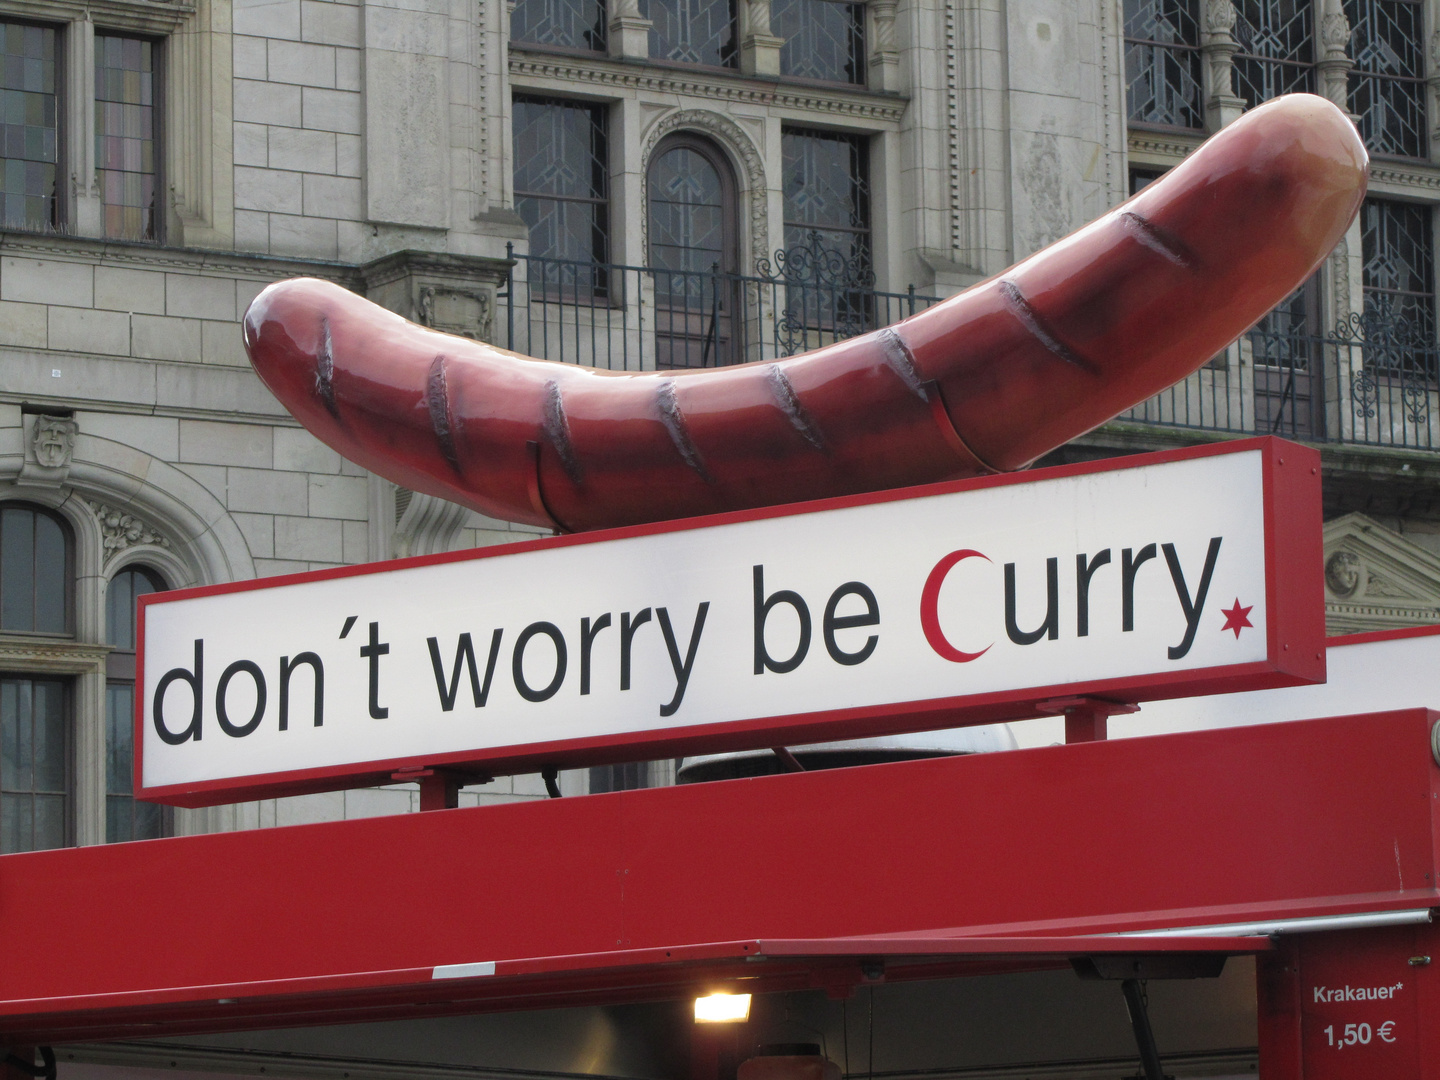 ... be curry!